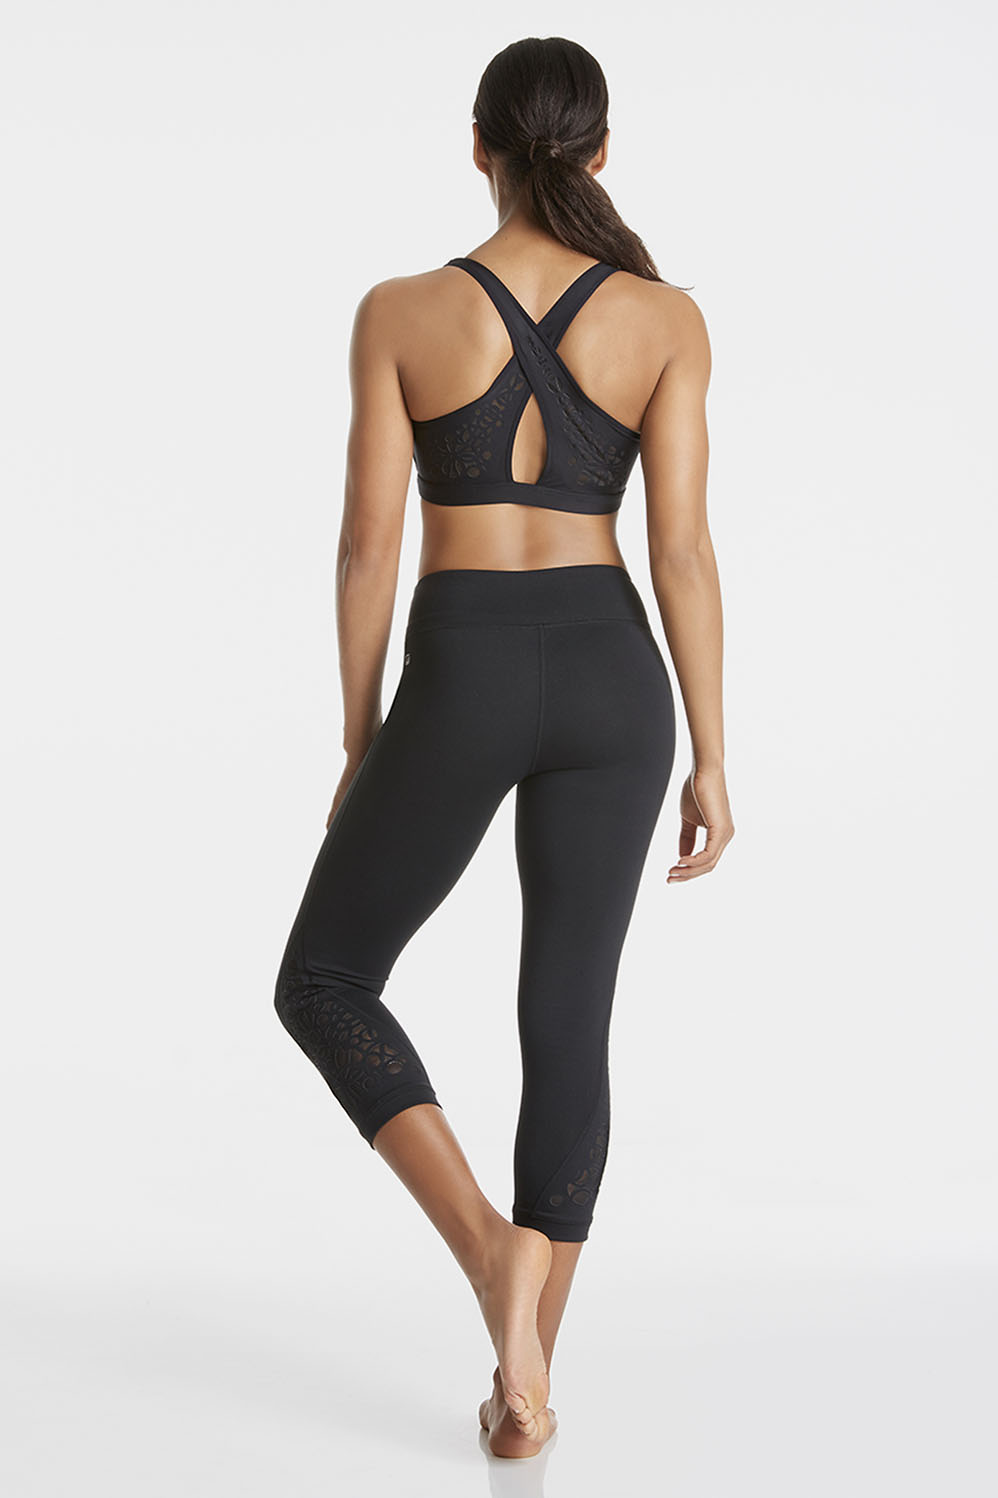 Nyx Outfit - Get great athletic wear at Fabletics